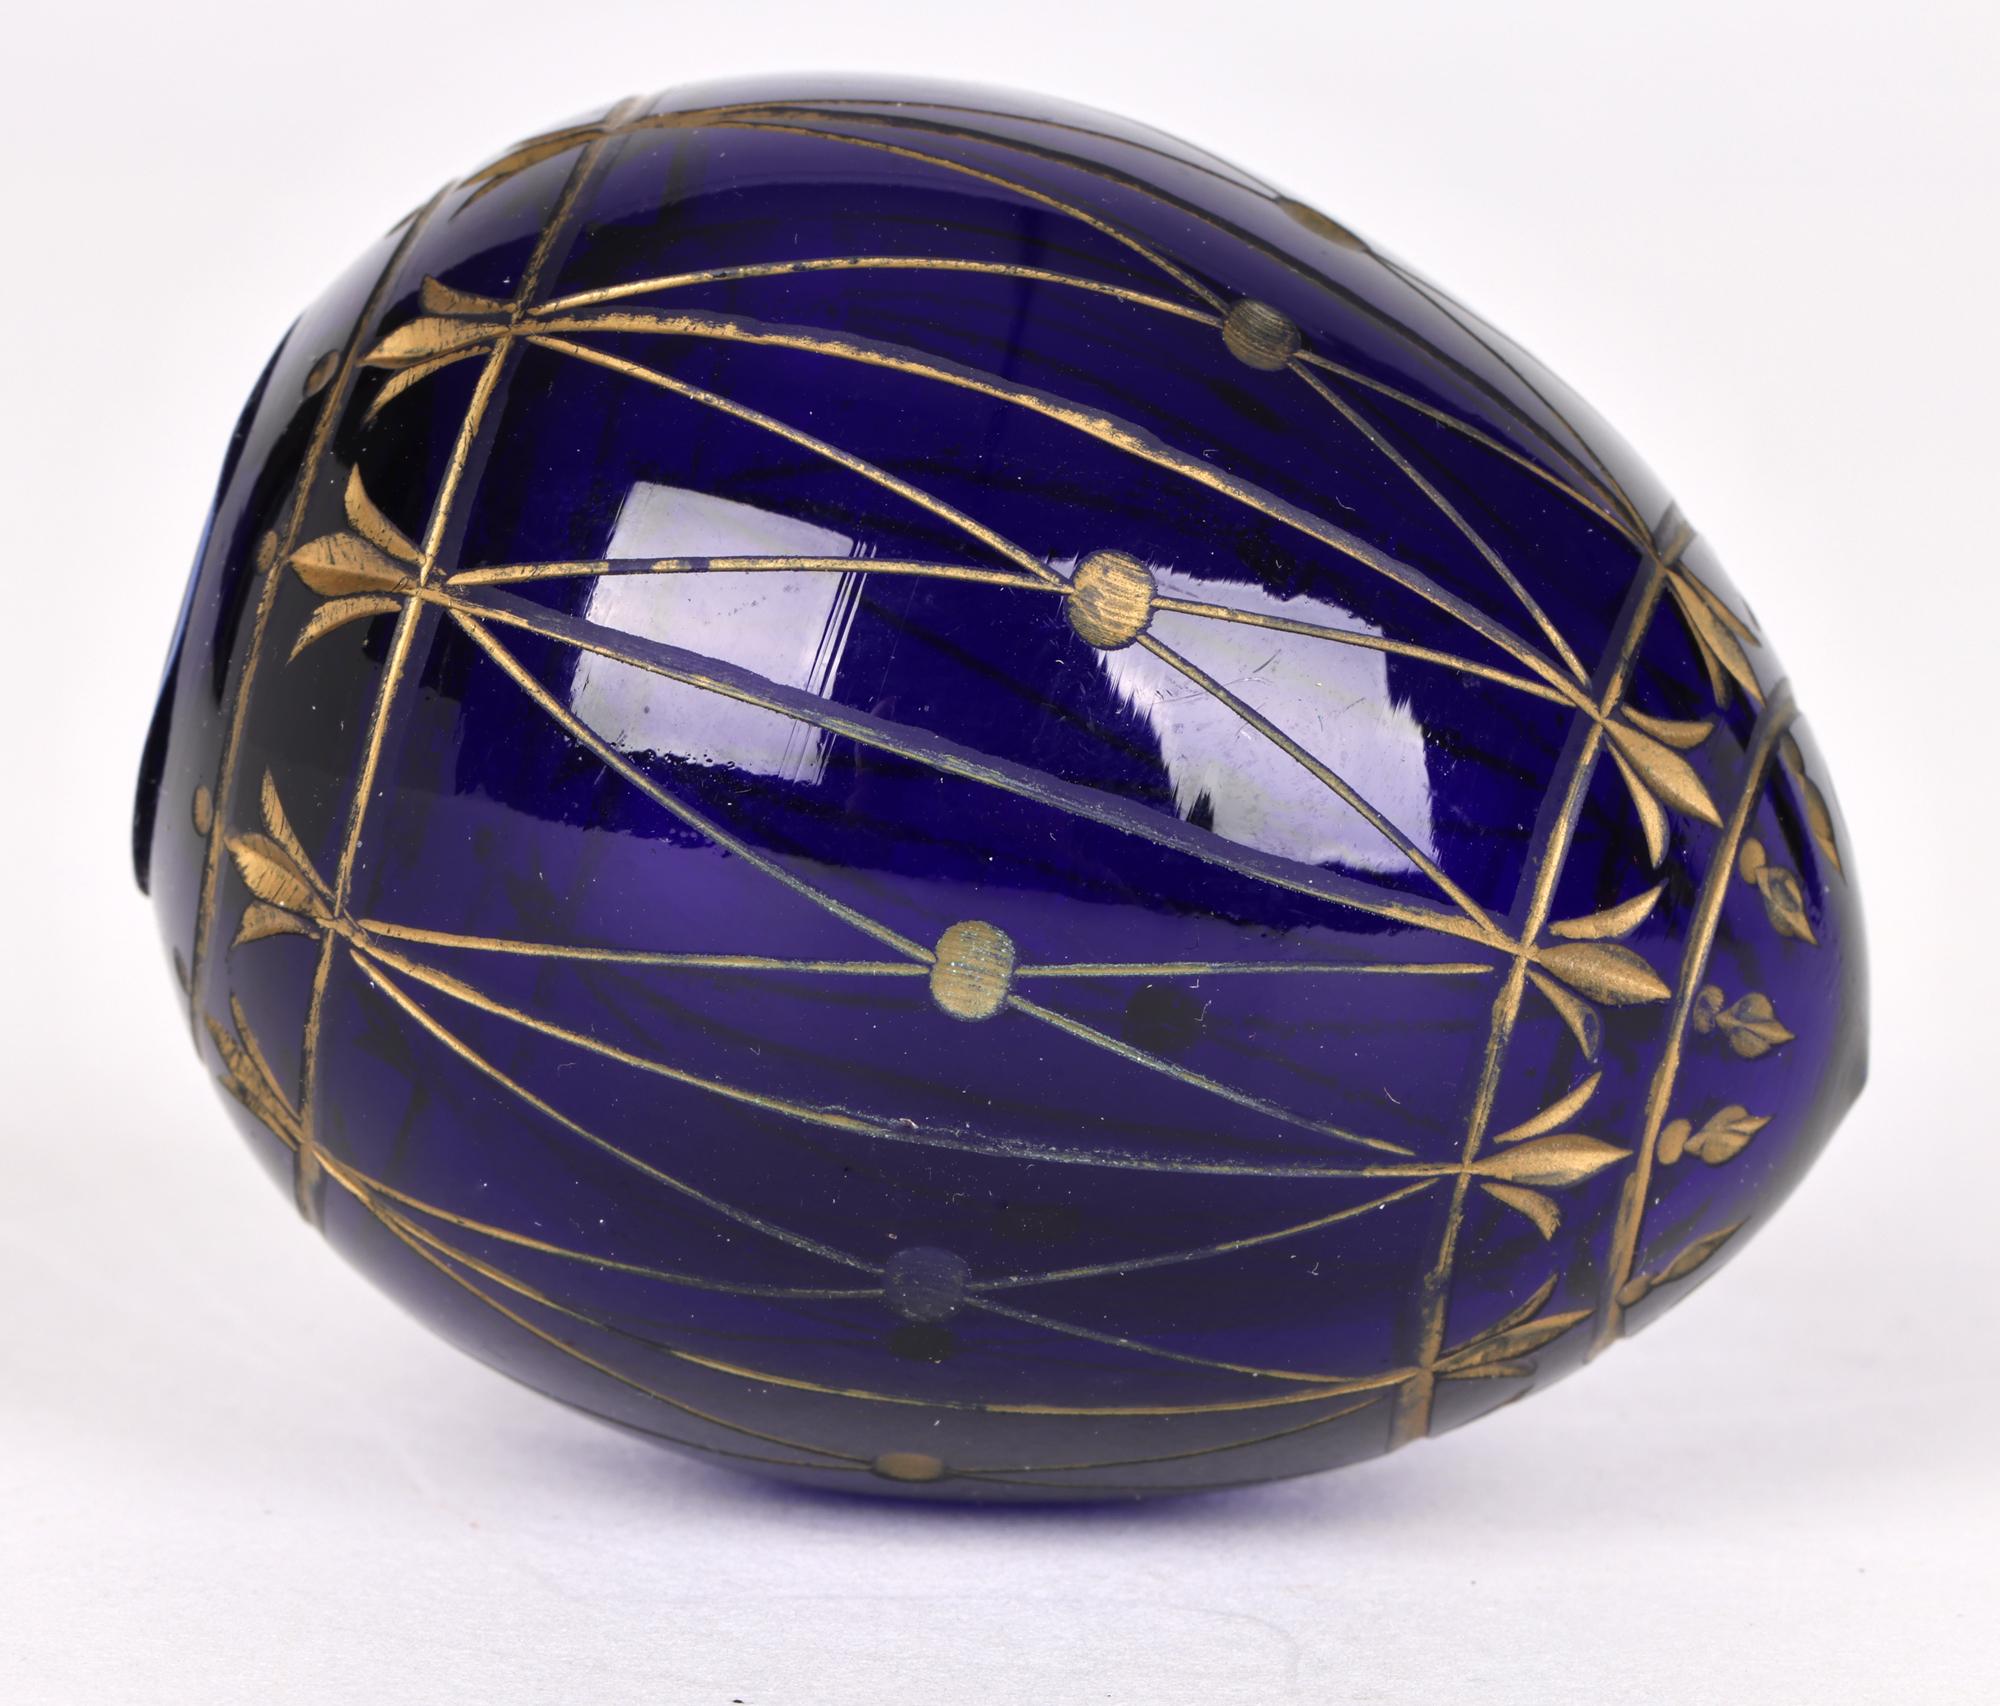 20th Century Russian Blue Glass Egg with Engraved Designs Faberge Label